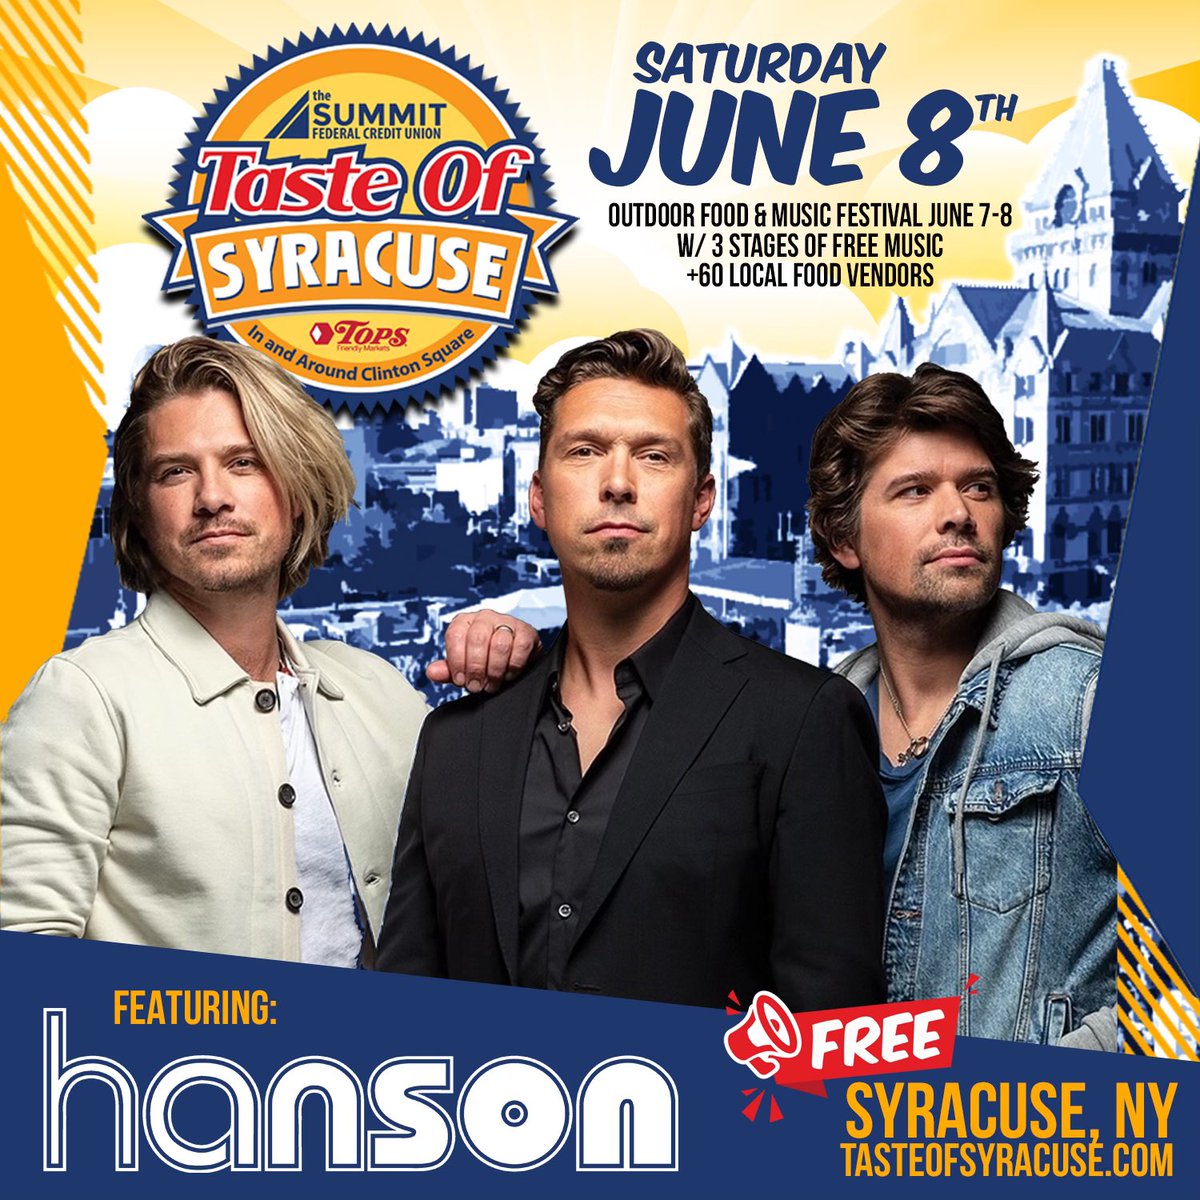 Join us at the @tasteofsyracuse festival on June 8th! Check TasteofSyracuse.com for more details.